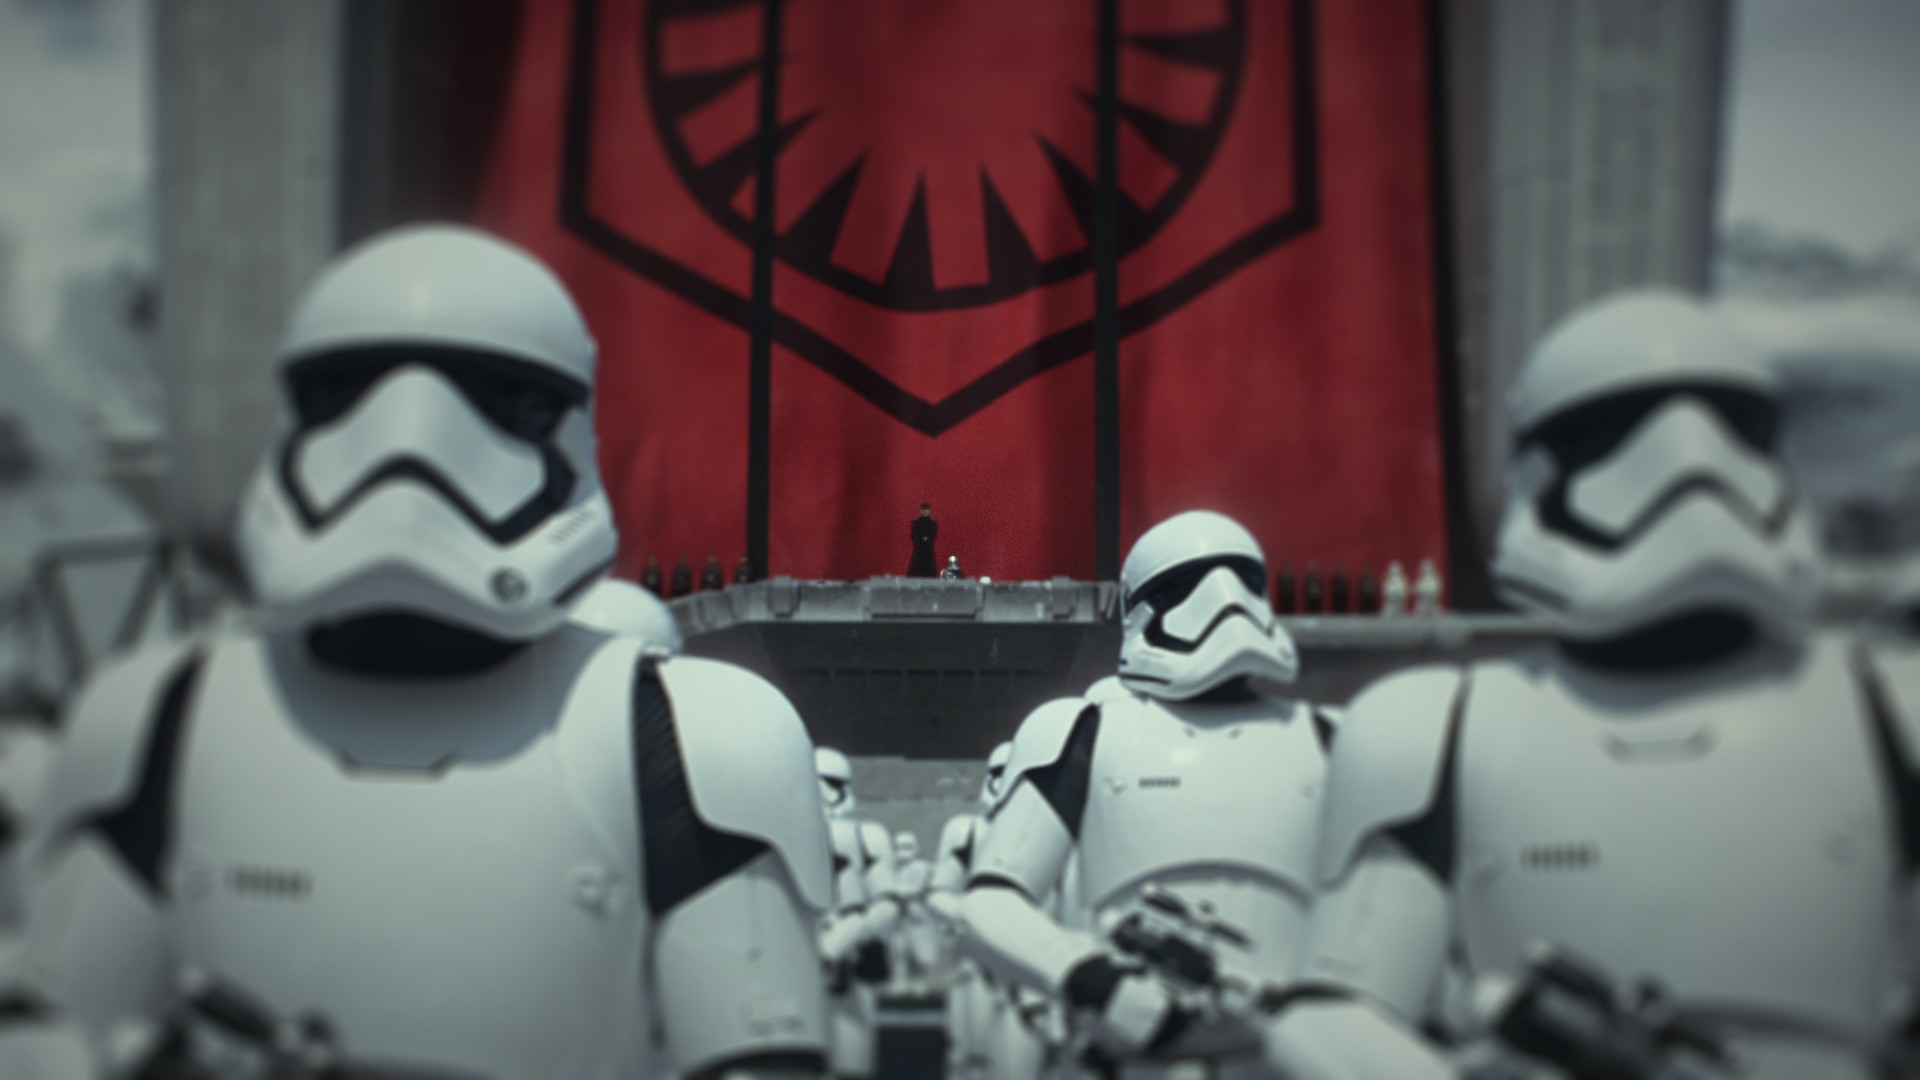 … Star Wars Ep. 7 First Order wallpaper by PepperRoniLove